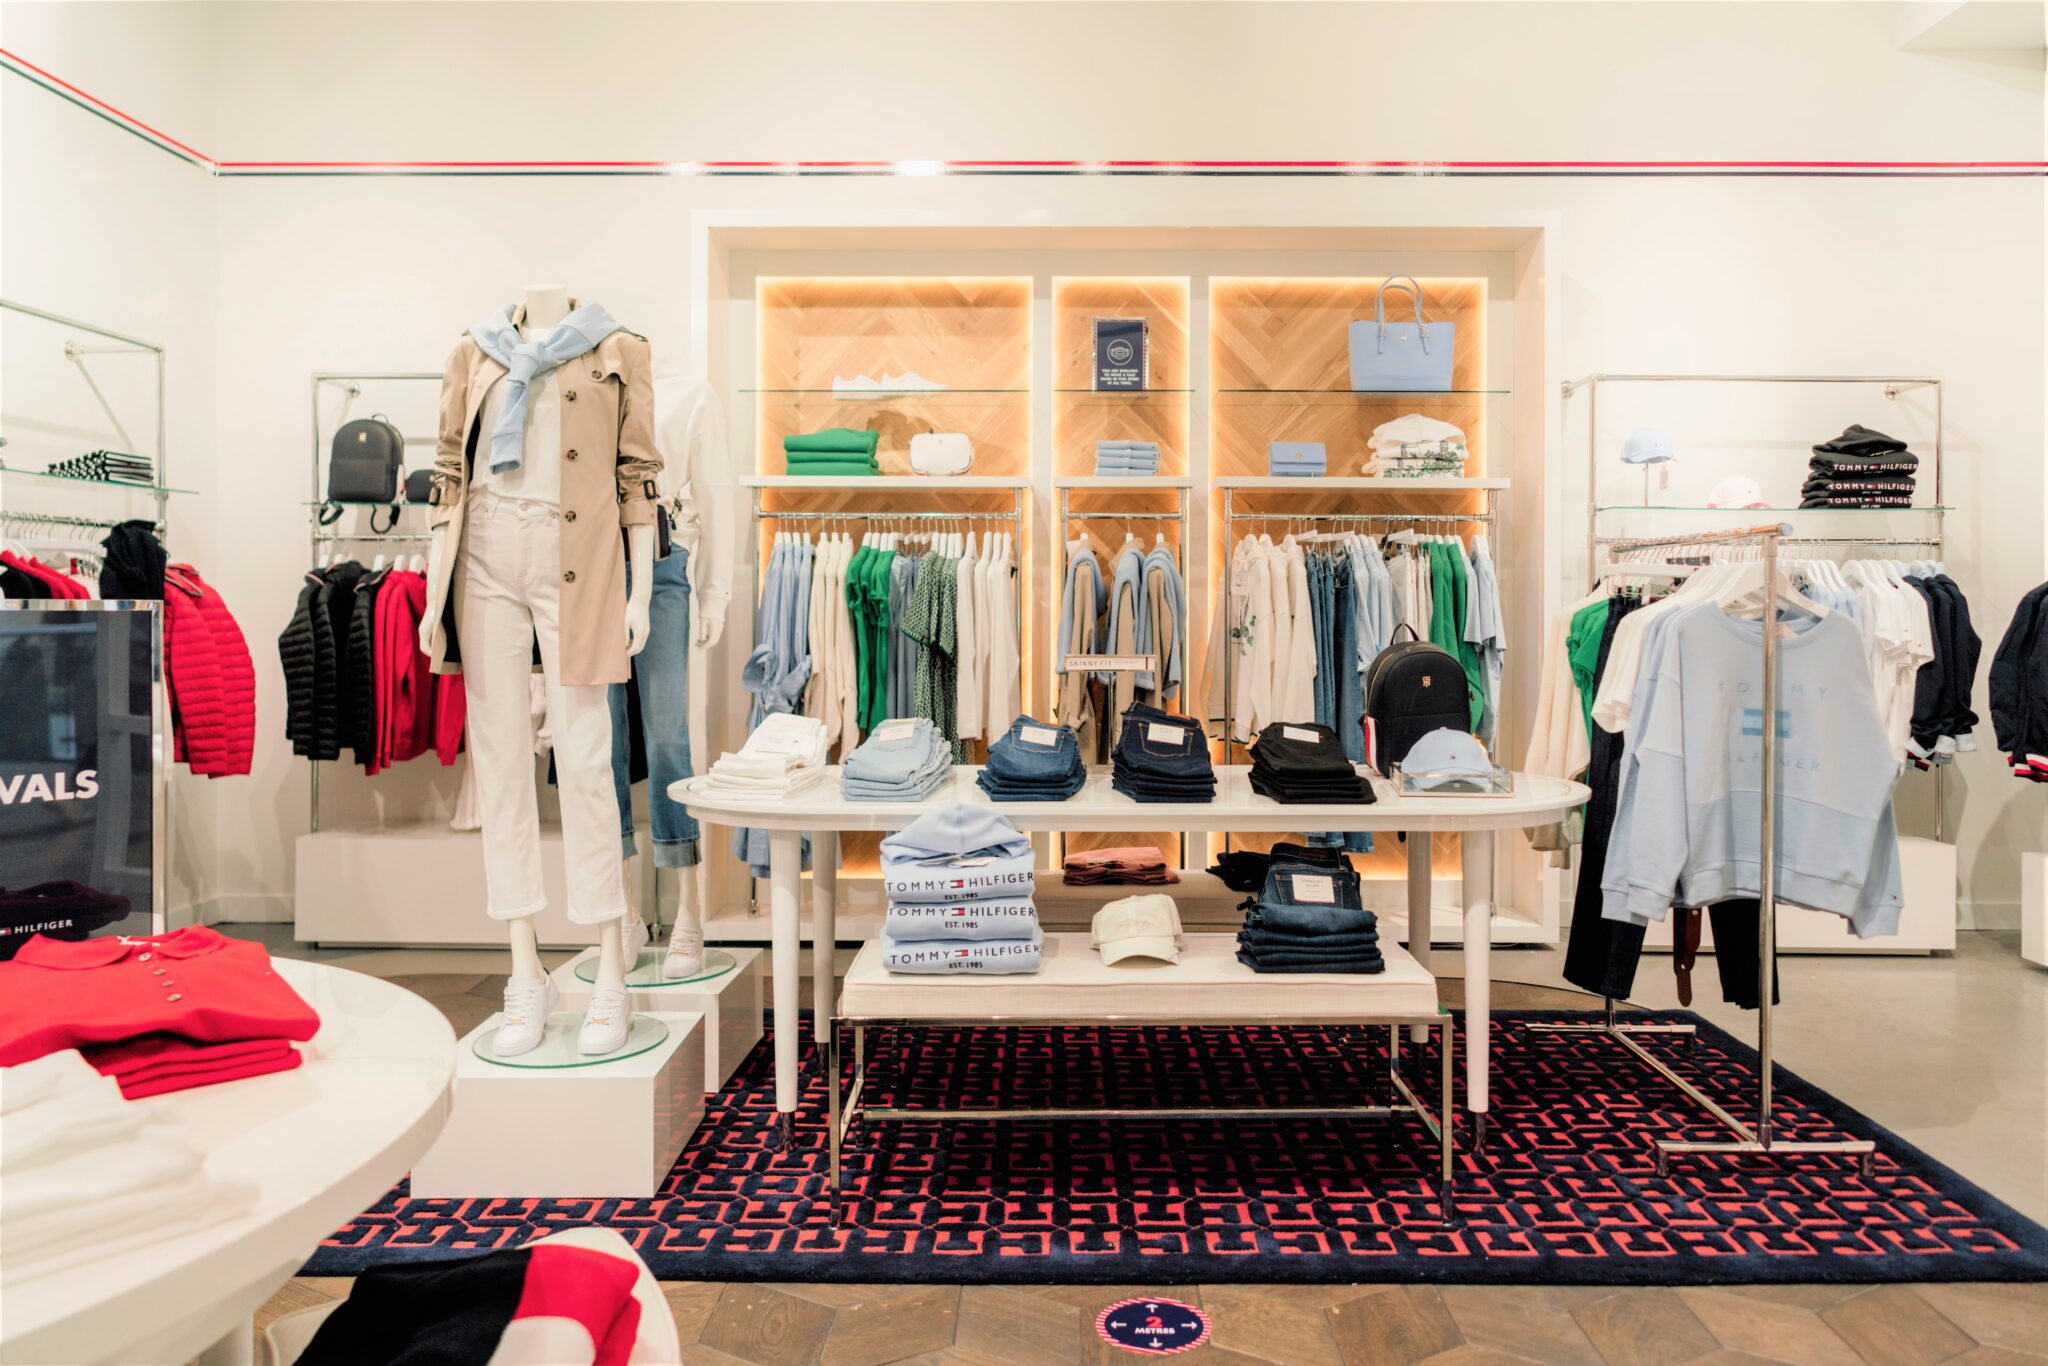 Tommy Hilfiger opens new store at Lakeside - Retail Focus - Retail Design